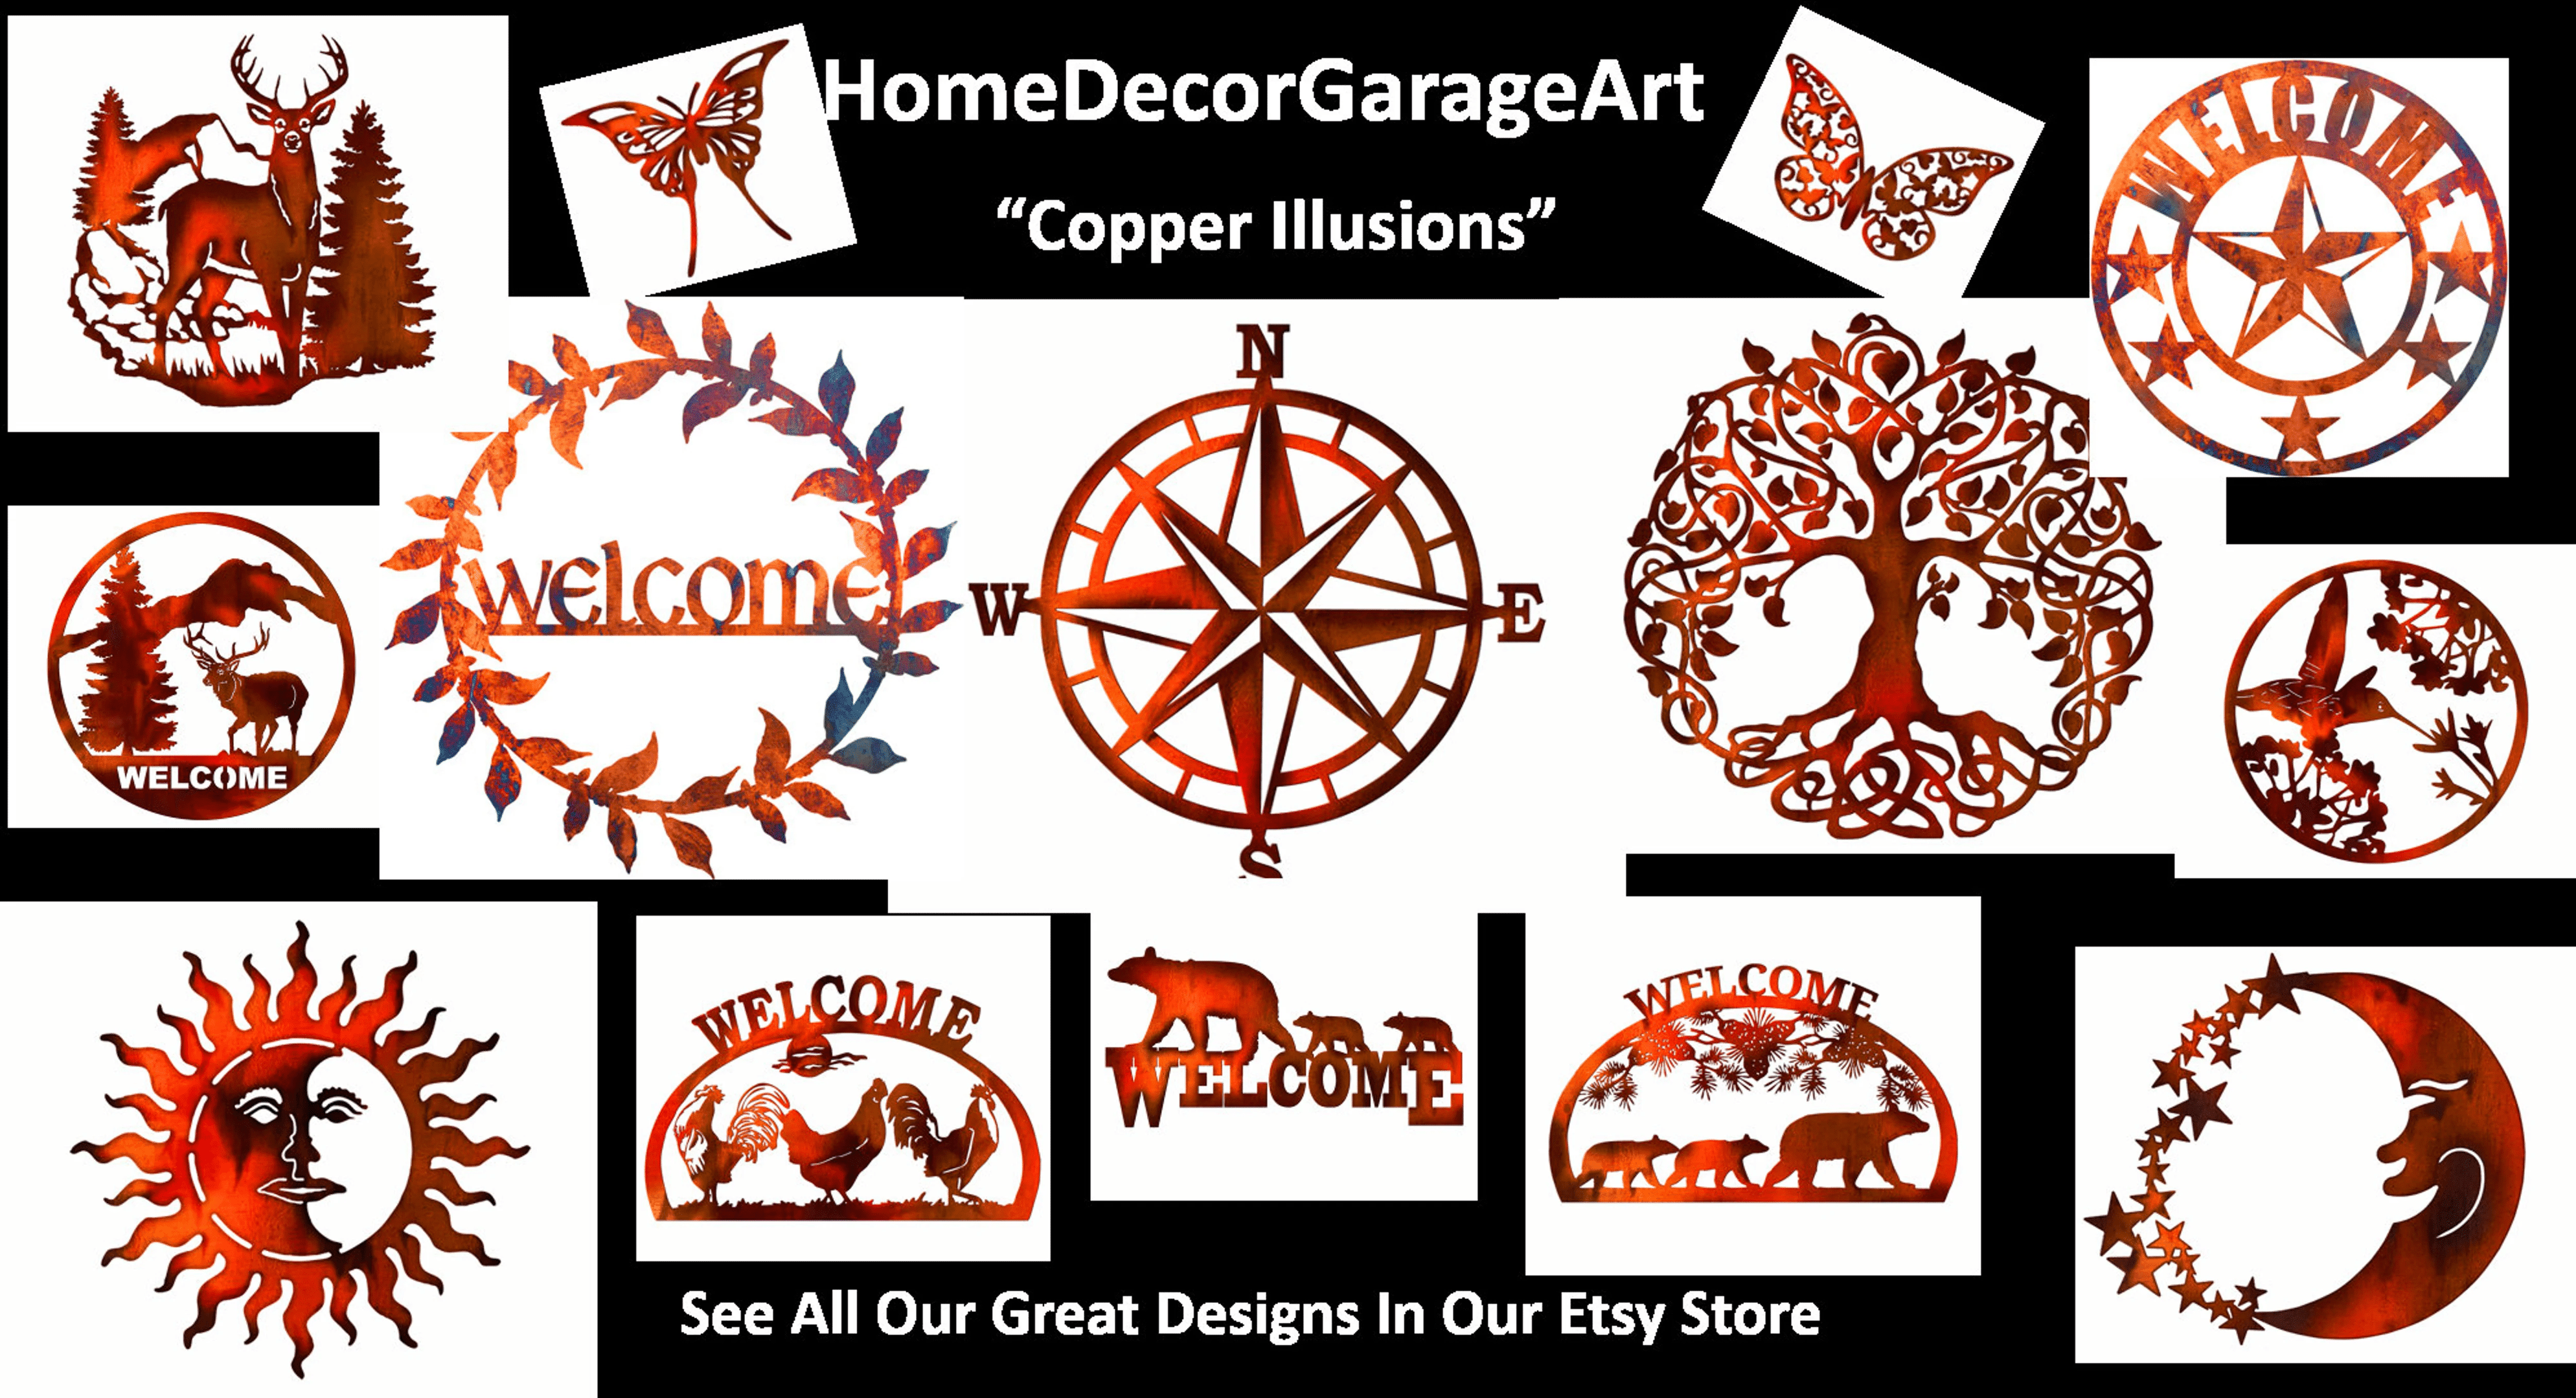 Bear Paw Copper Illusions Laser Cut Out Sign With Copper Looking Finish Silhouette Metal Art Sign Wall Decor Art RG